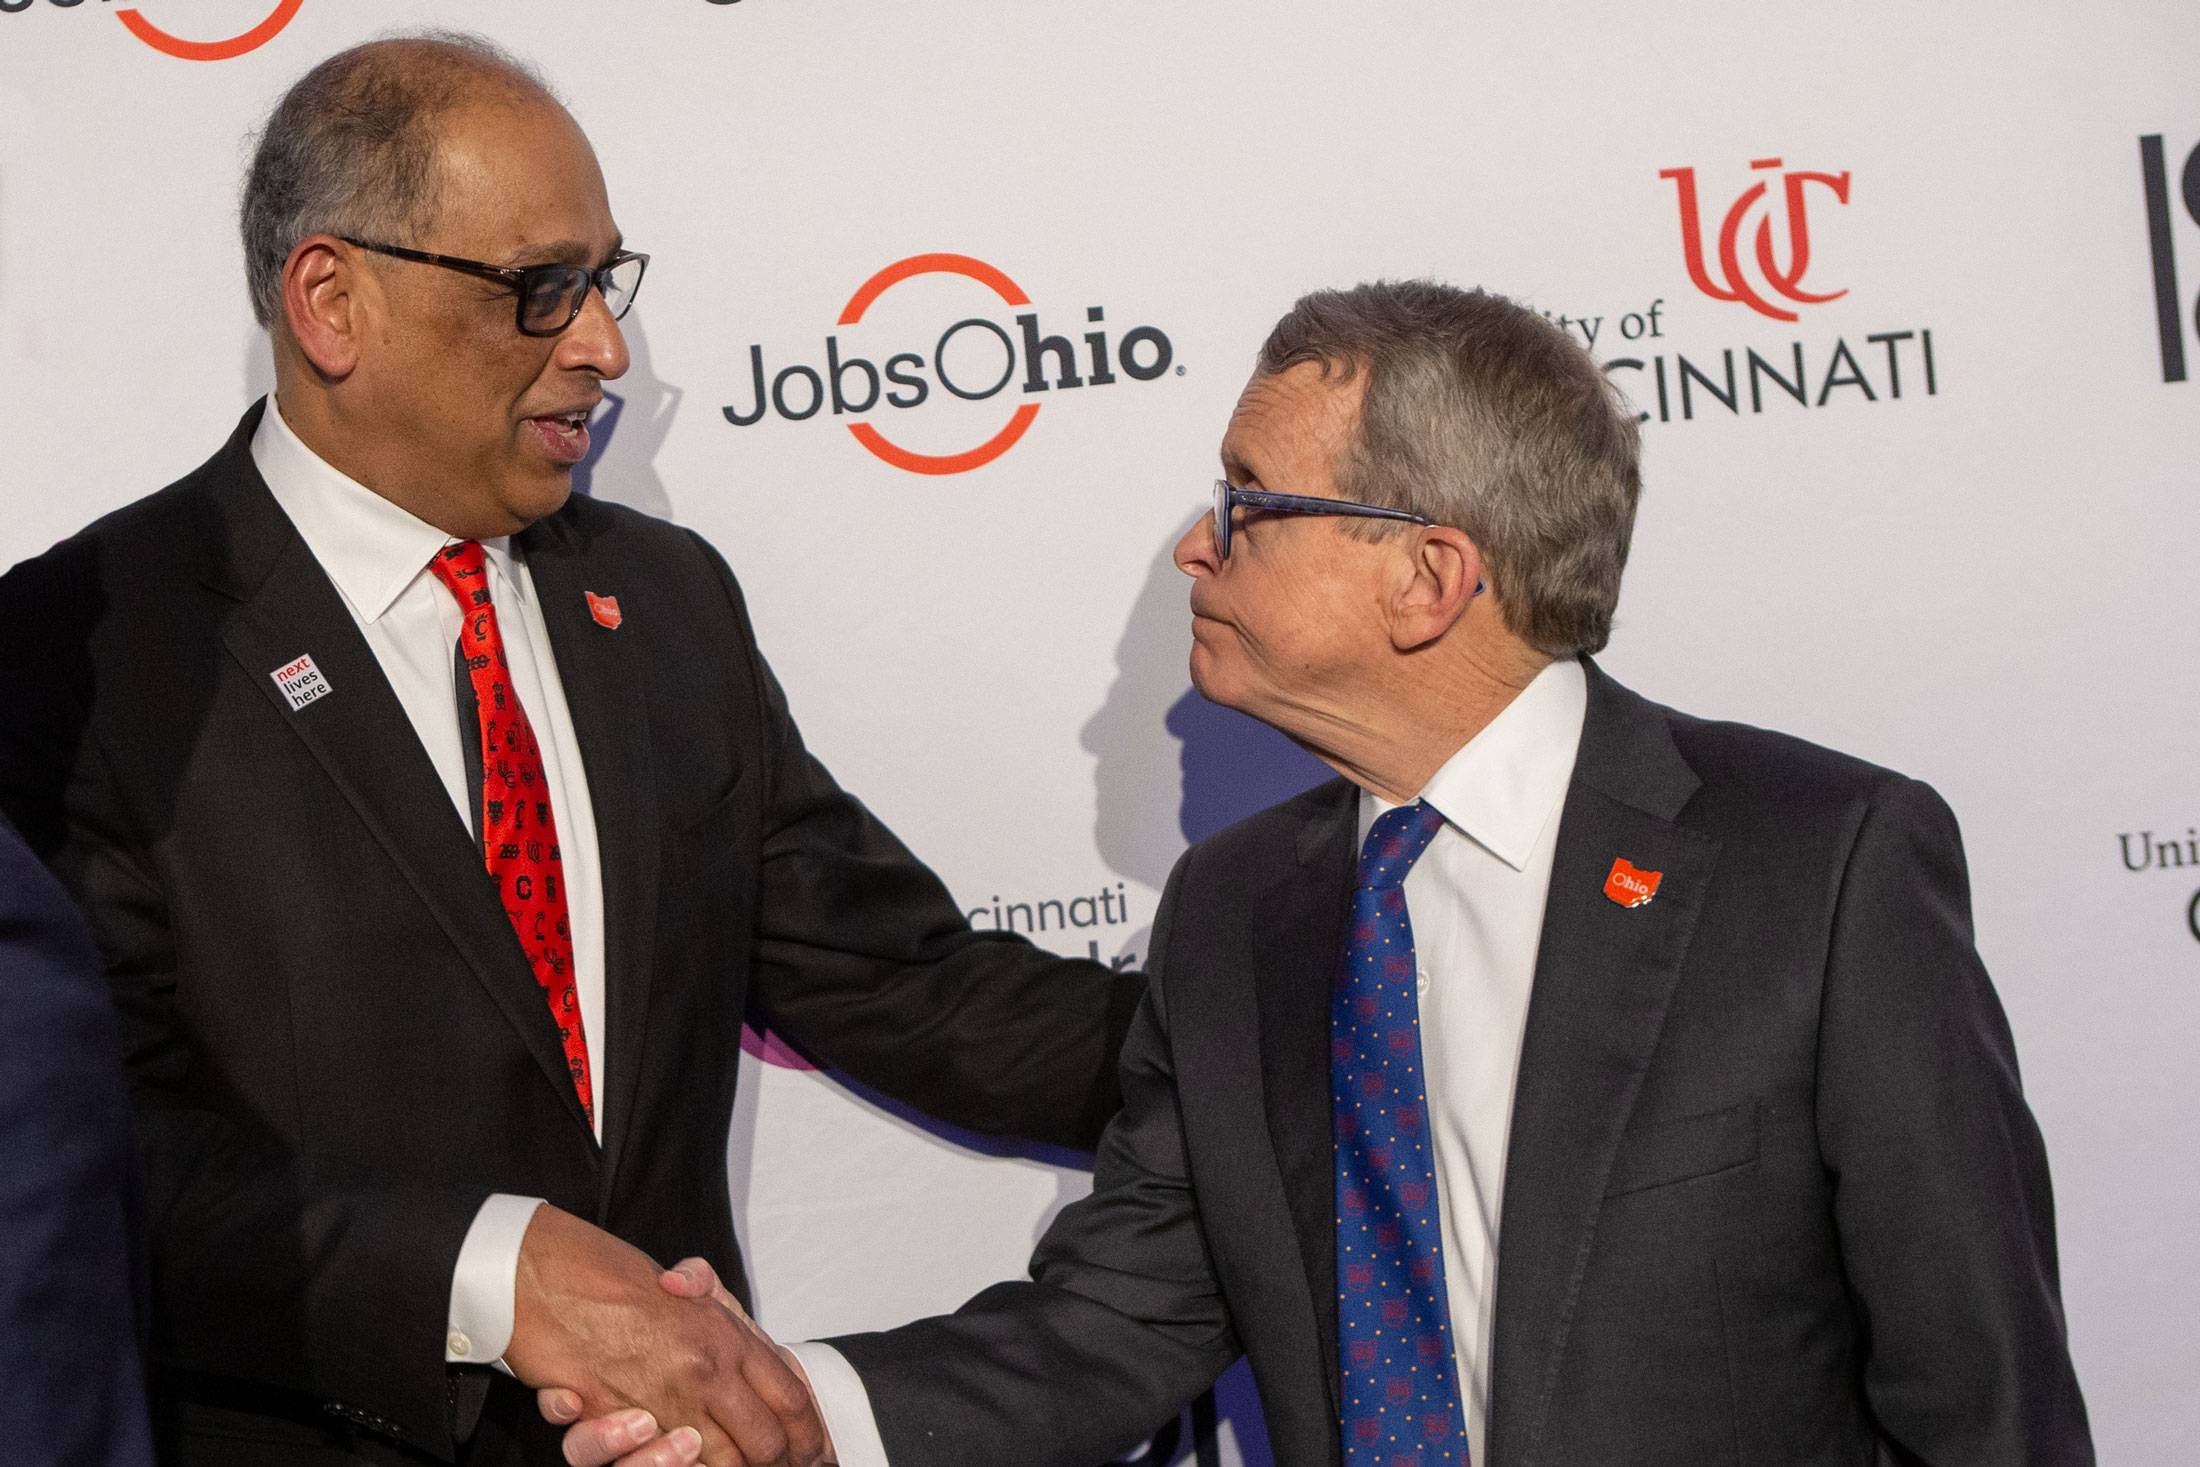 UC President Neville Pinto shakes hands with Ohio Governor Mike Dewine